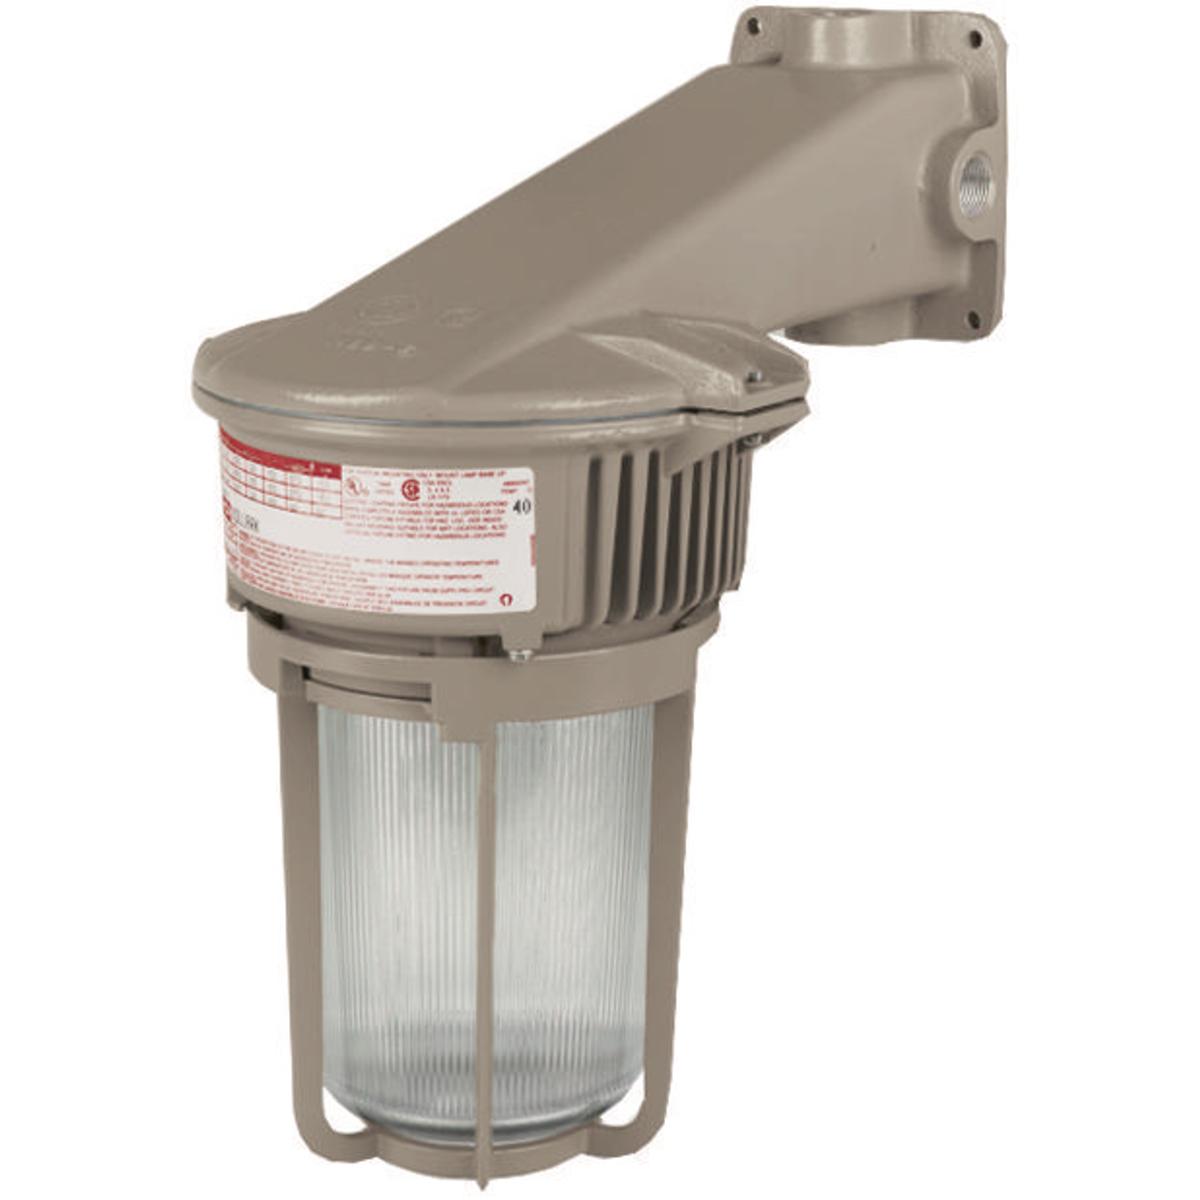 Hubbell MBL4530B2R5G The MBL Series is a compact low bay energy efficient LED. The design of the MBL makes it suitable for harsh and hazardous environments using a cast copper-free aluminum. Its low profile and compact design allow the MBL to fit in areas where larger fixture